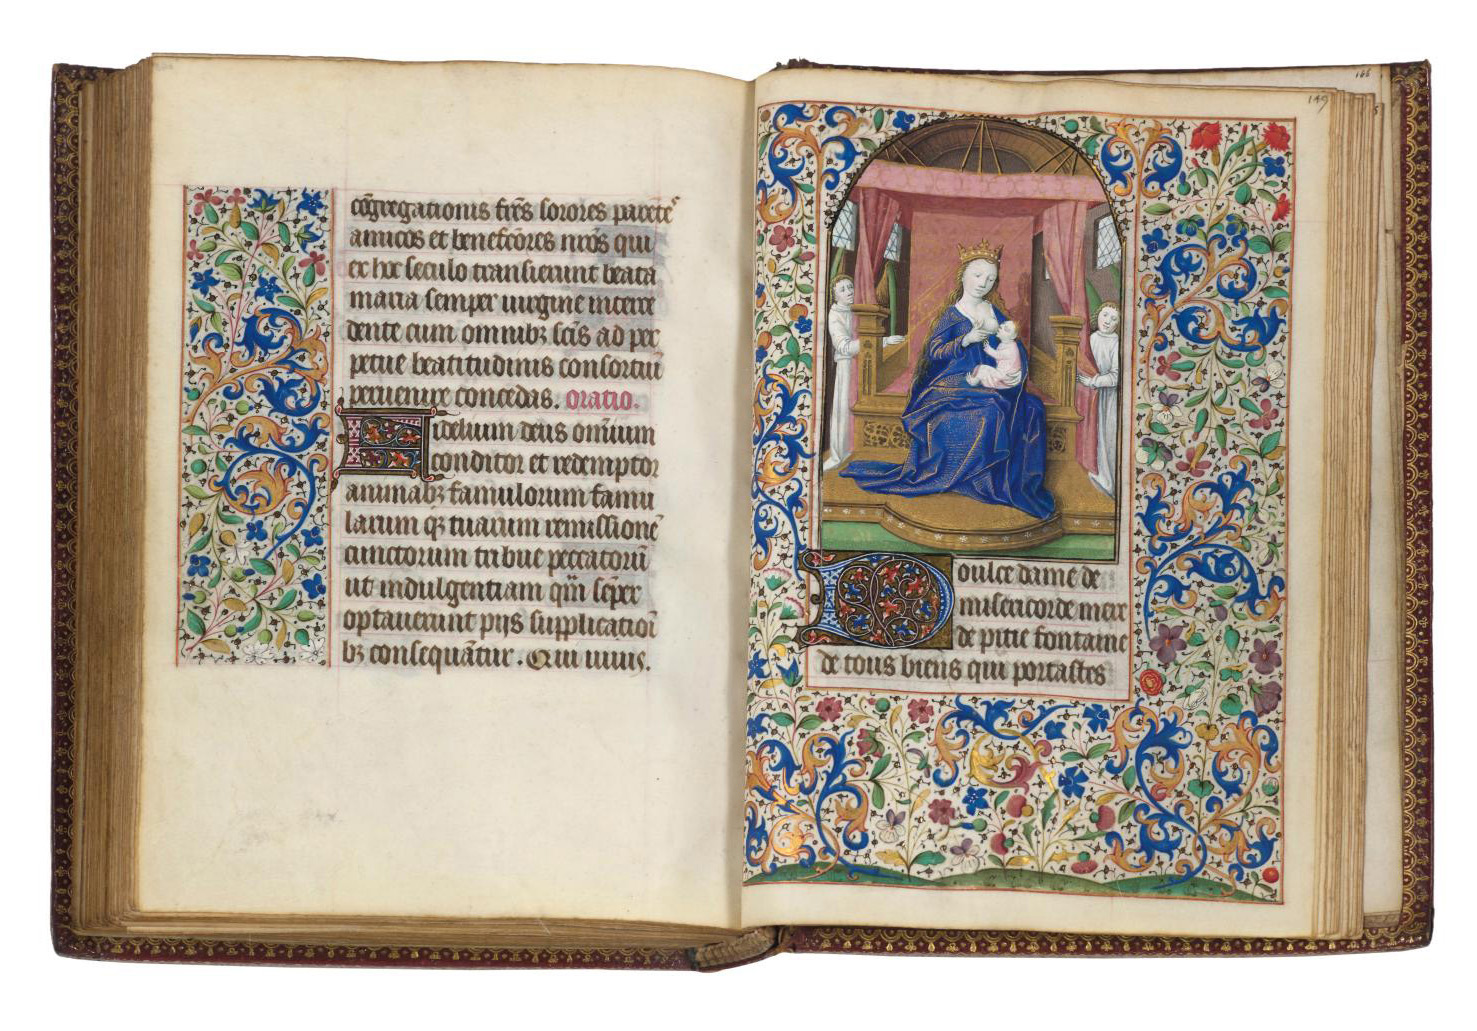 €269,760Paris, c. 1460. Book of Hours for the Paris Rite in Latin and French, illuminated manuscript on parchment by the Master of Coëtivy